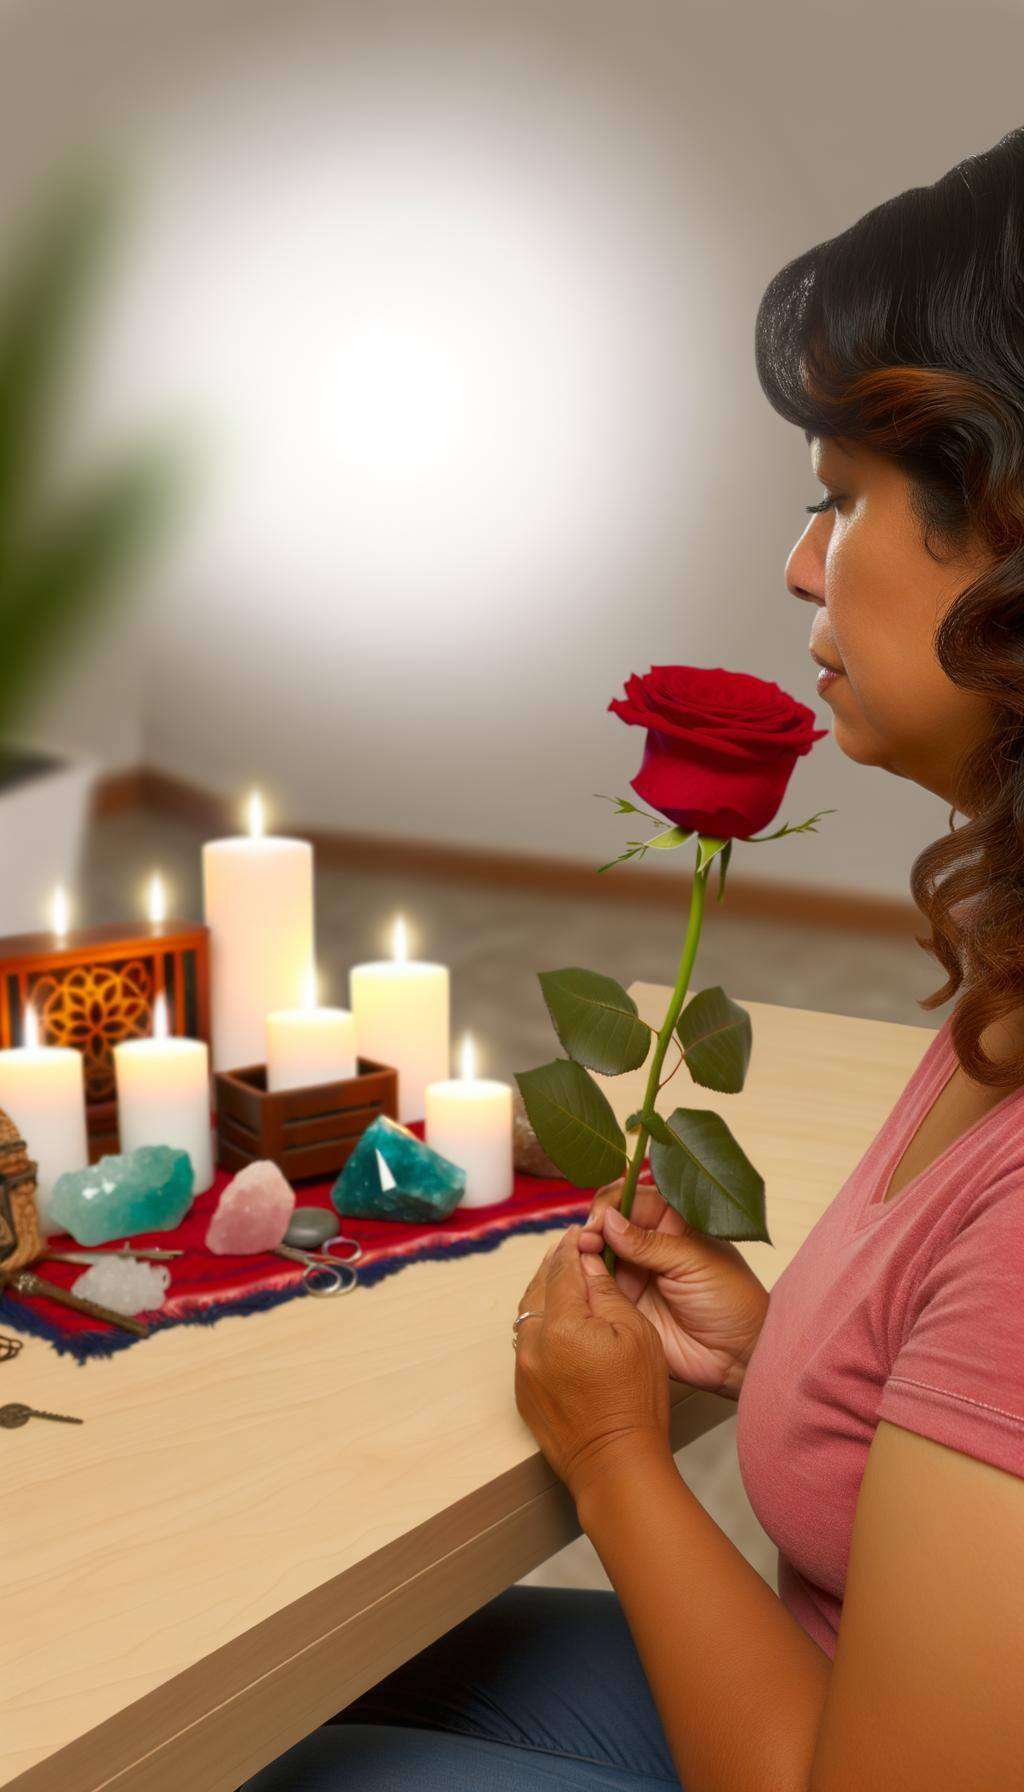 A photorealistic image of a calming, candlelit room with a person holding a red rose and performing a gentle, meditative ritual